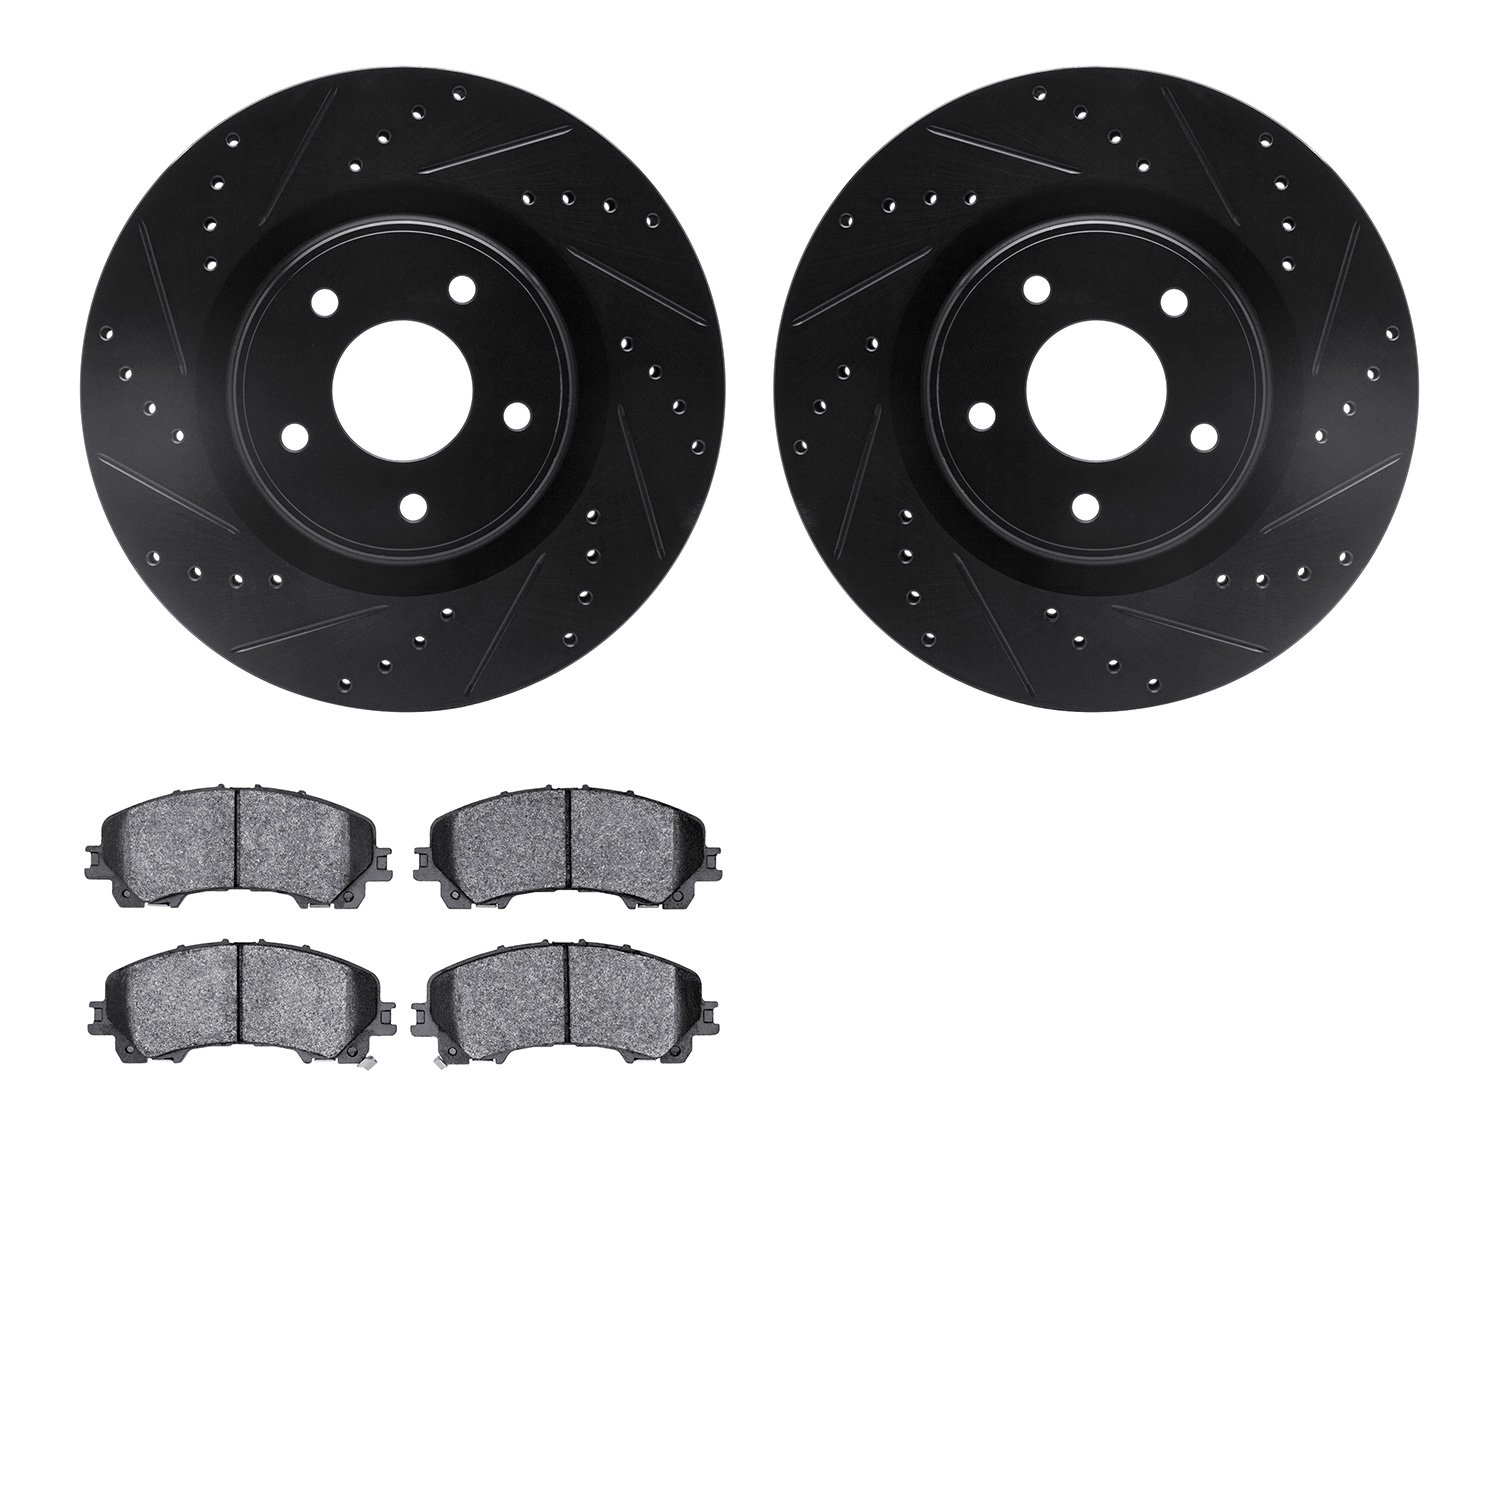 8502-67129 Drilled/Slotted Brake Rotors w/5000 Advanced Brake Pads Kit [Black], Fits Select Infiniti/Nissan, Position: Front